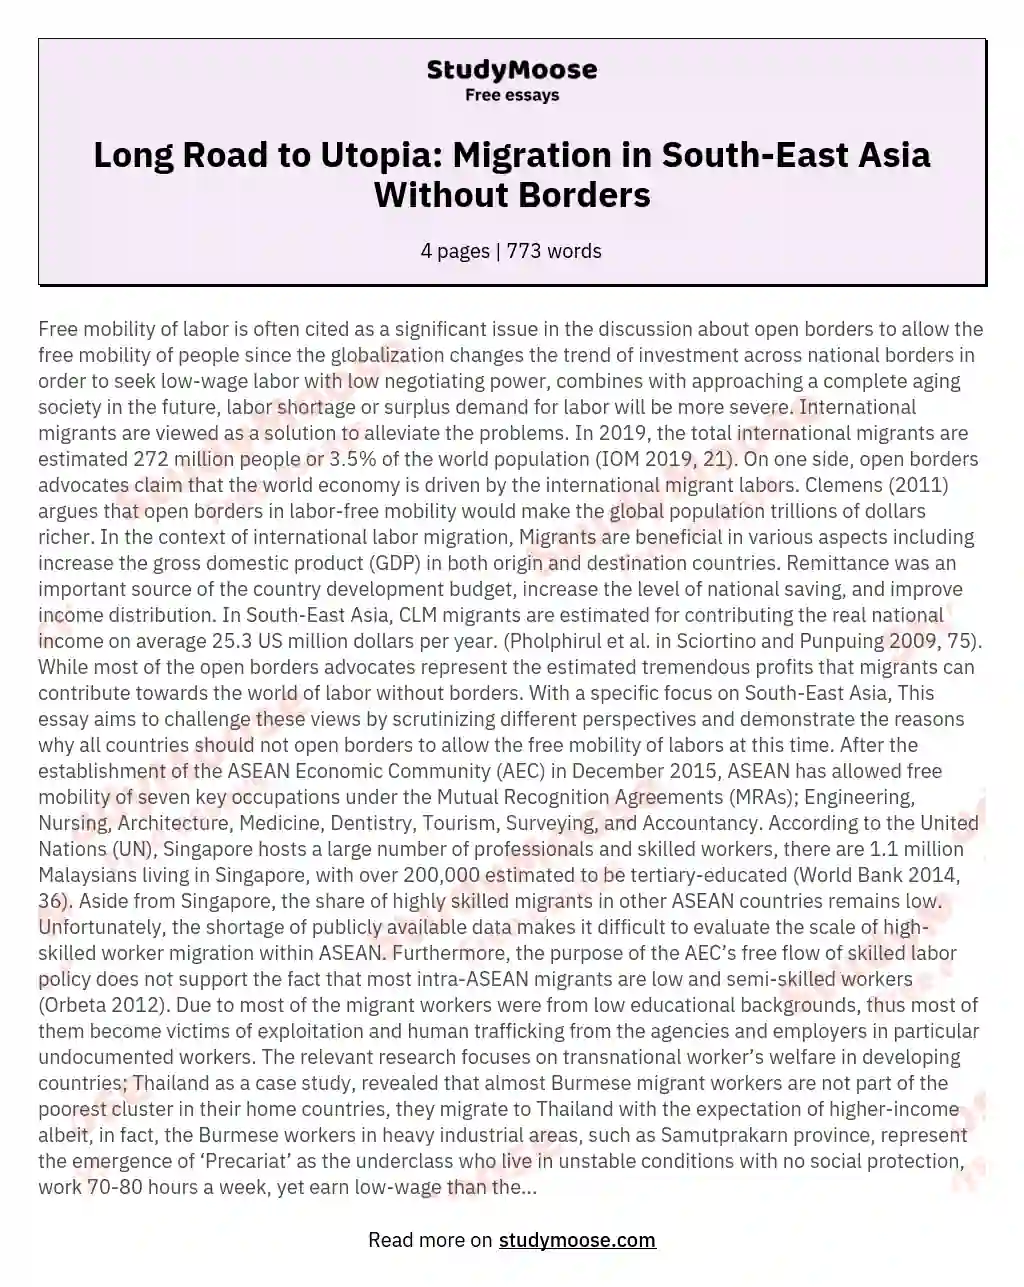 Long Road to Utopia: Migration in South-East Asia Without Borders